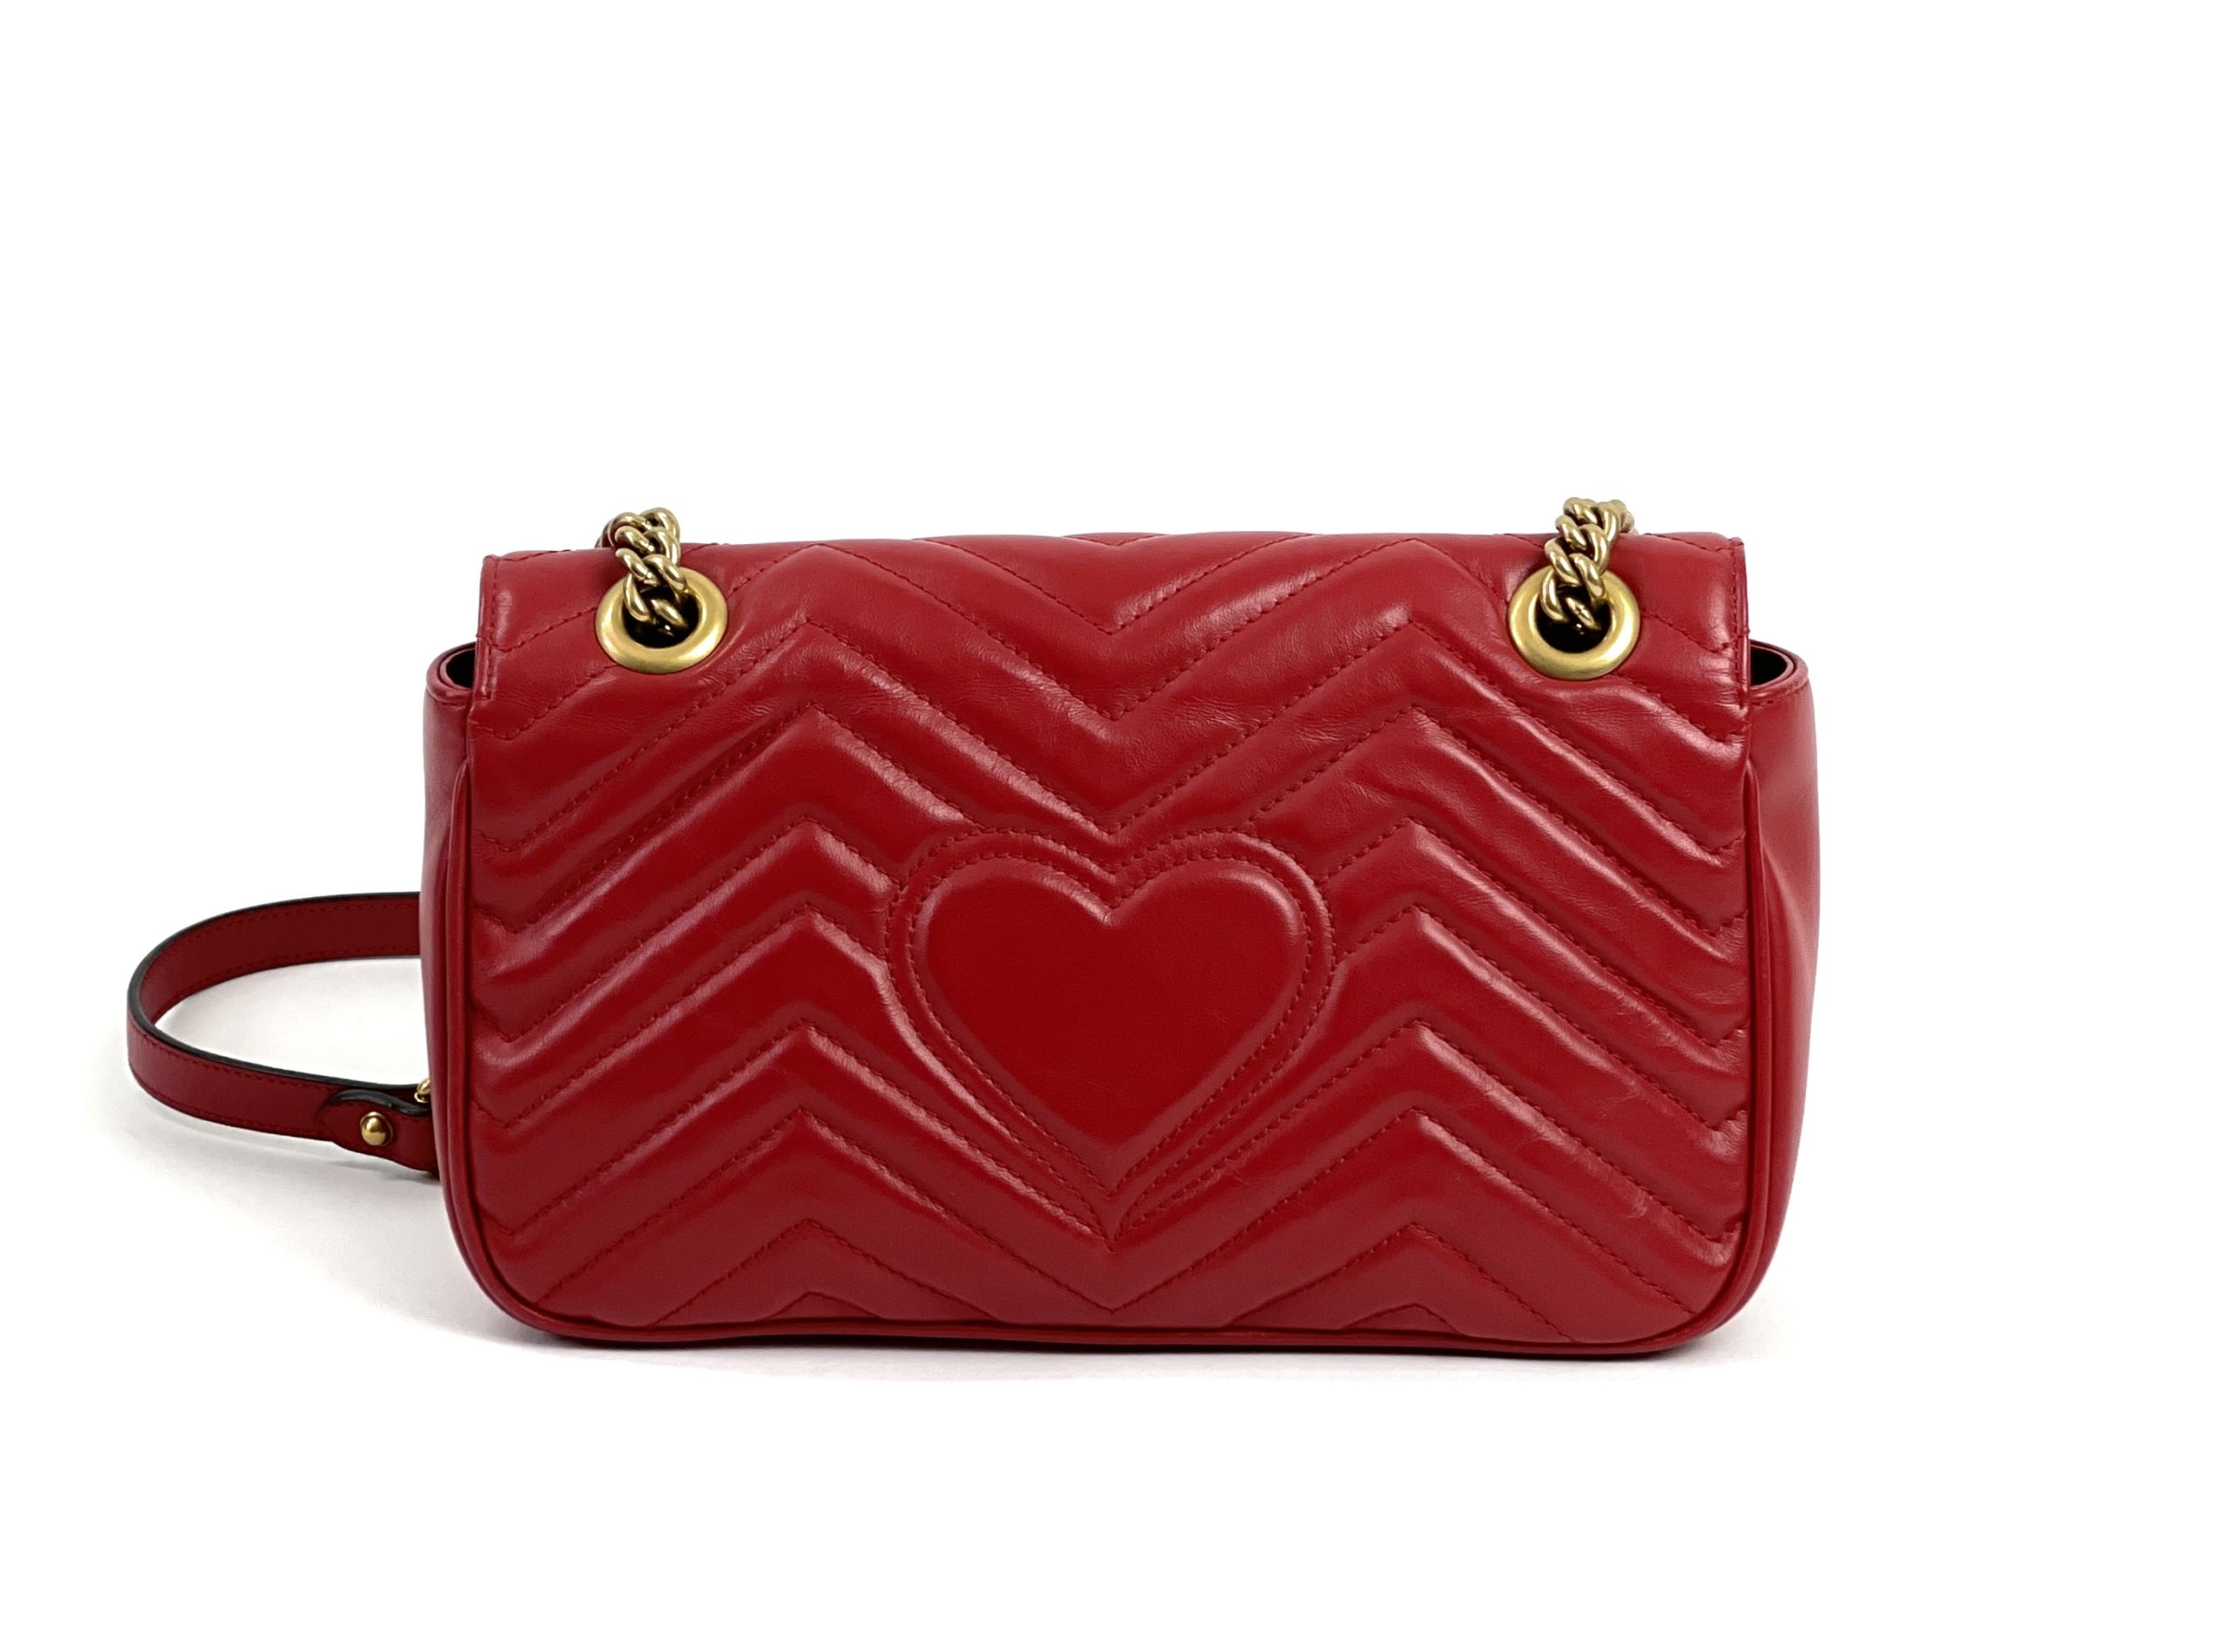 GUCCI Shoulder bag GG MARMONT SMALL in hibiscus red